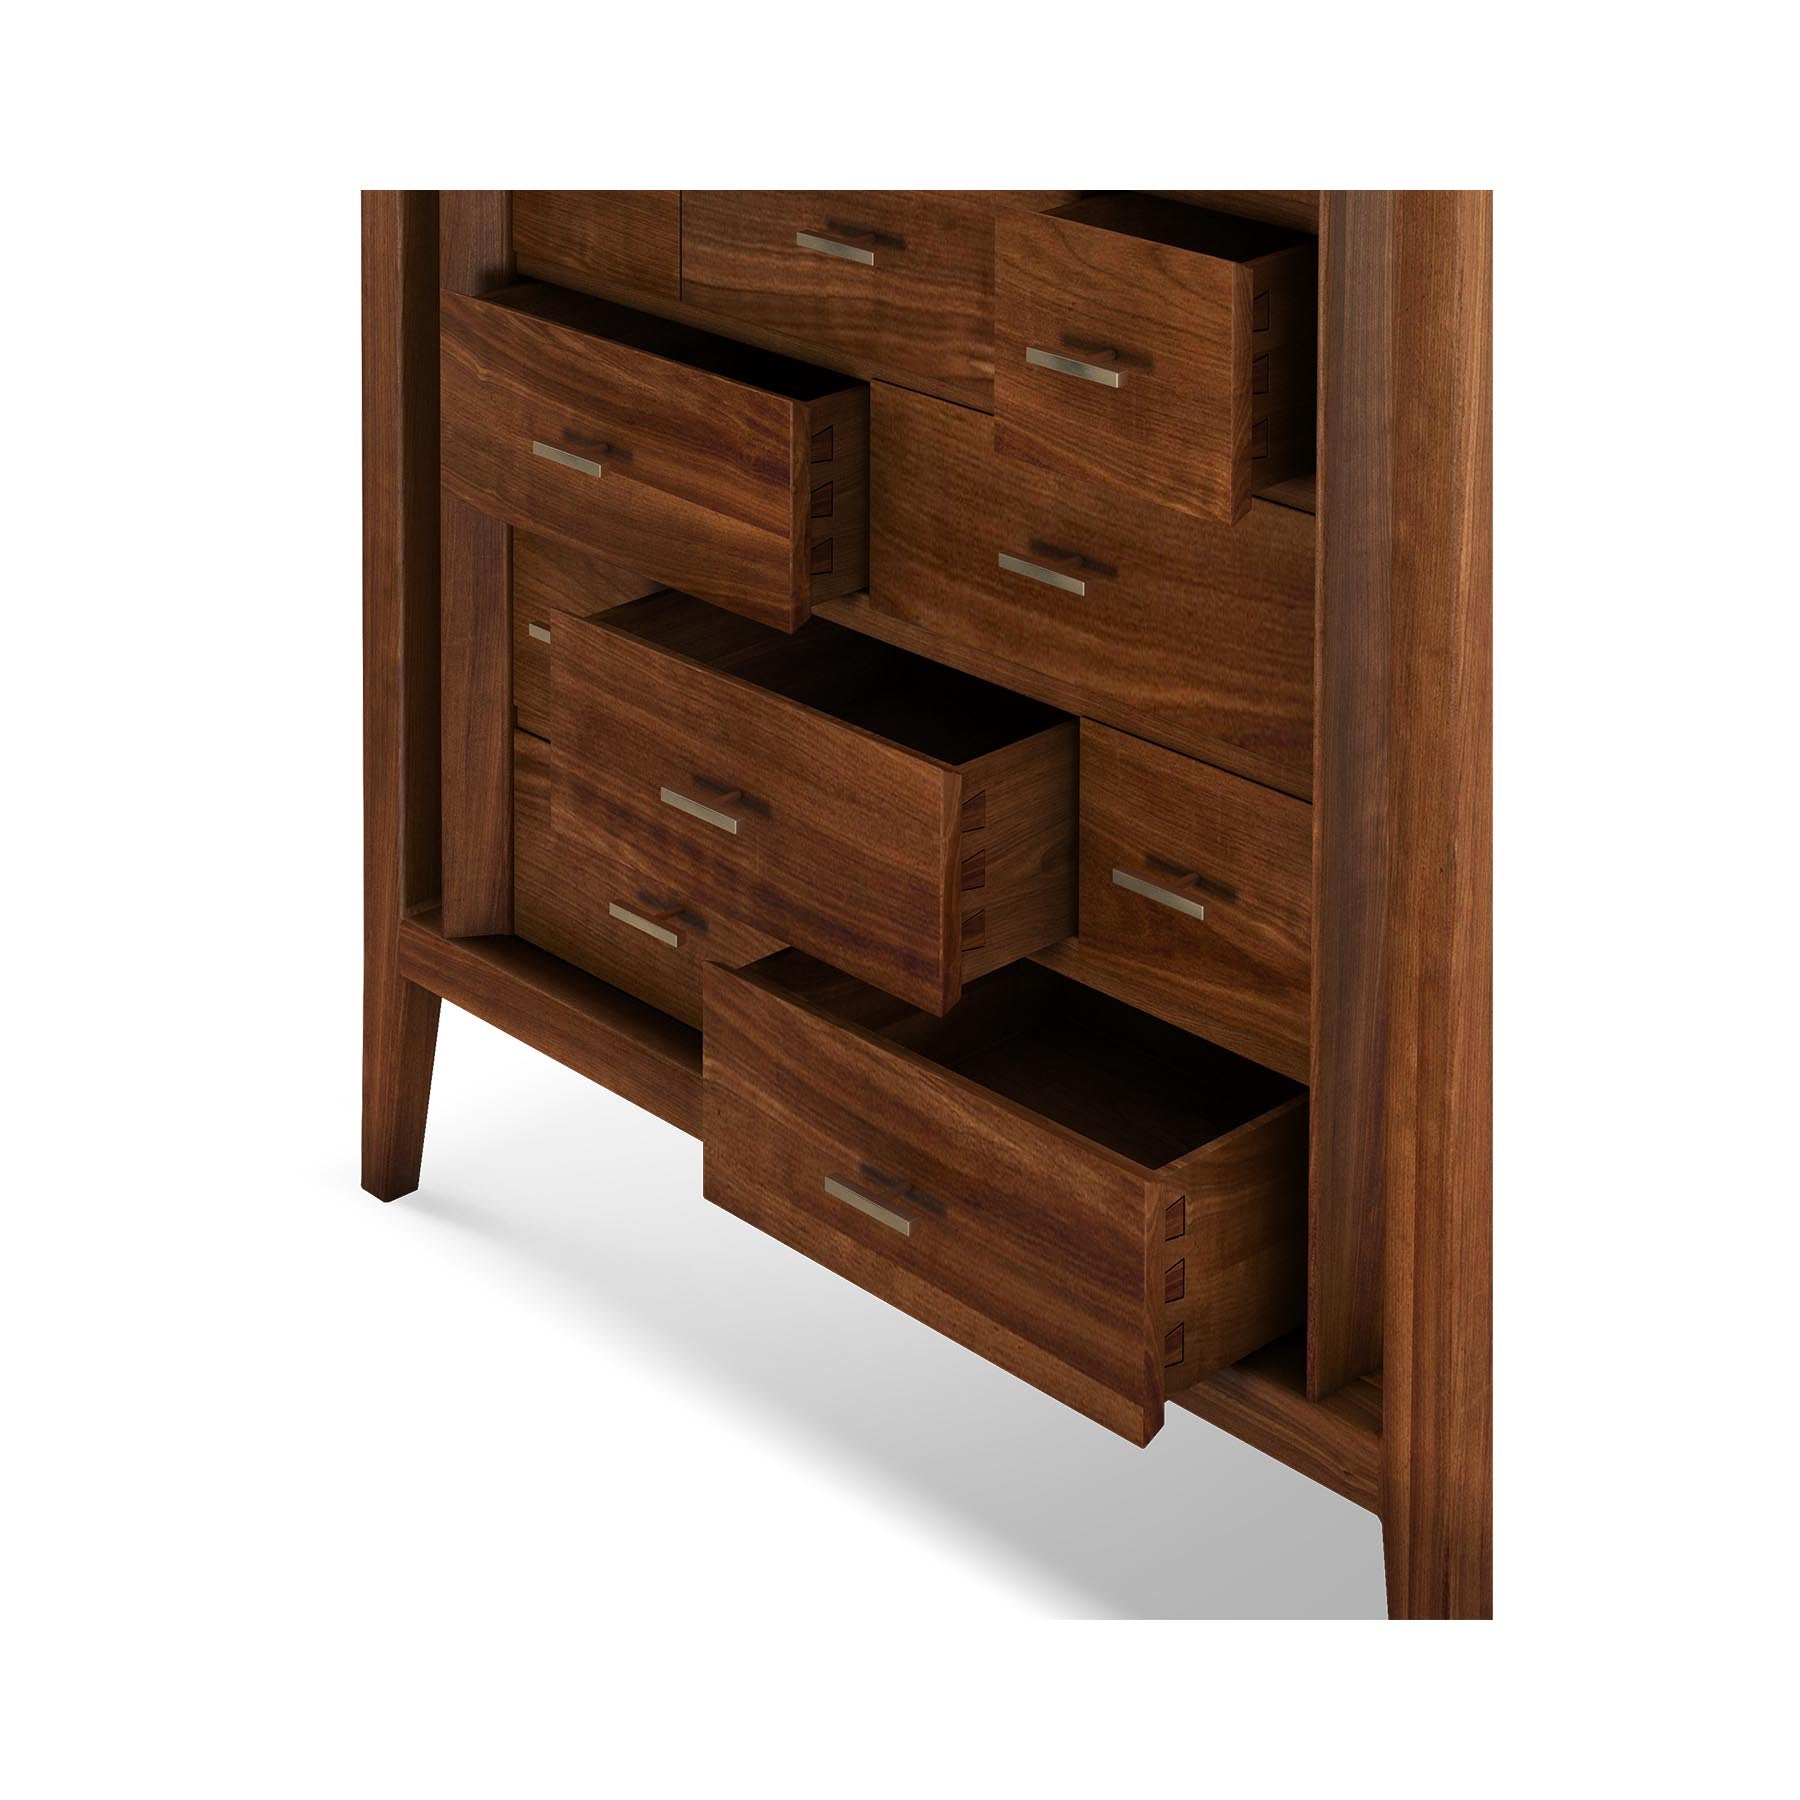 CAXTON - CHEST OF DRAWERS | Modern Furniture + Decor